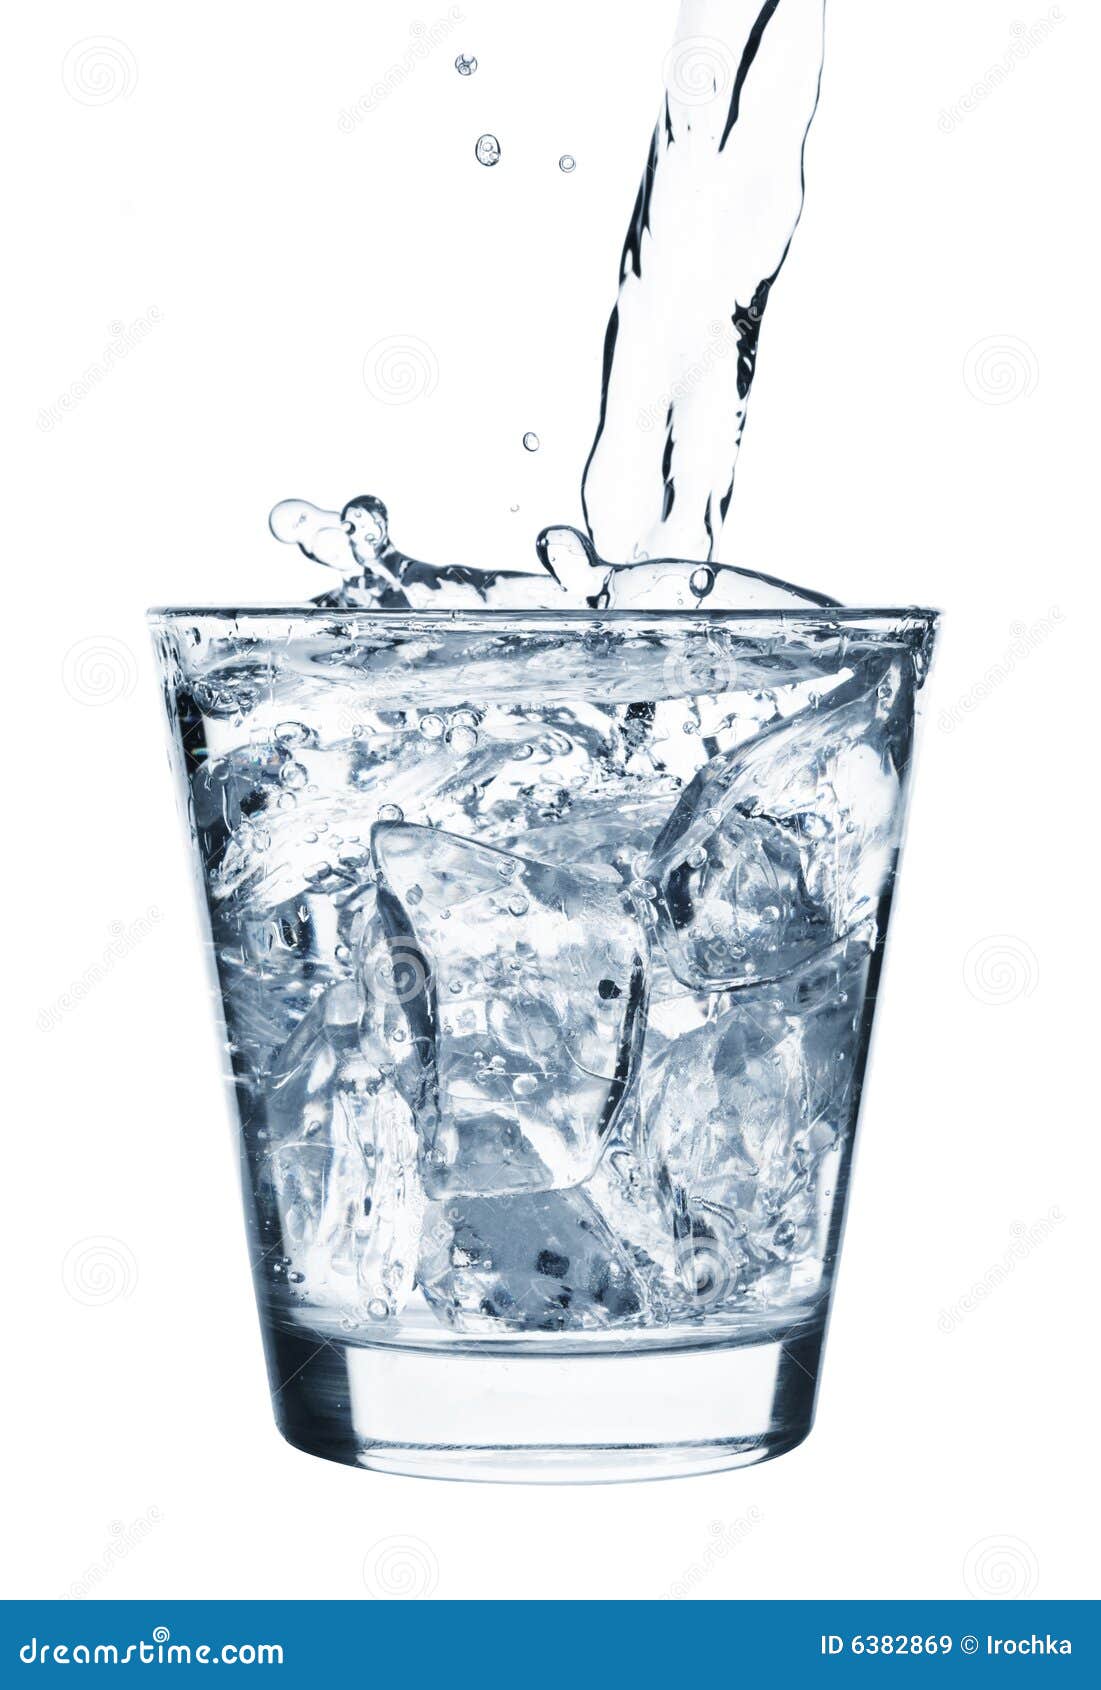 Ice Splashing In Cup Of Water Stock Image Image Of Drink Liquid